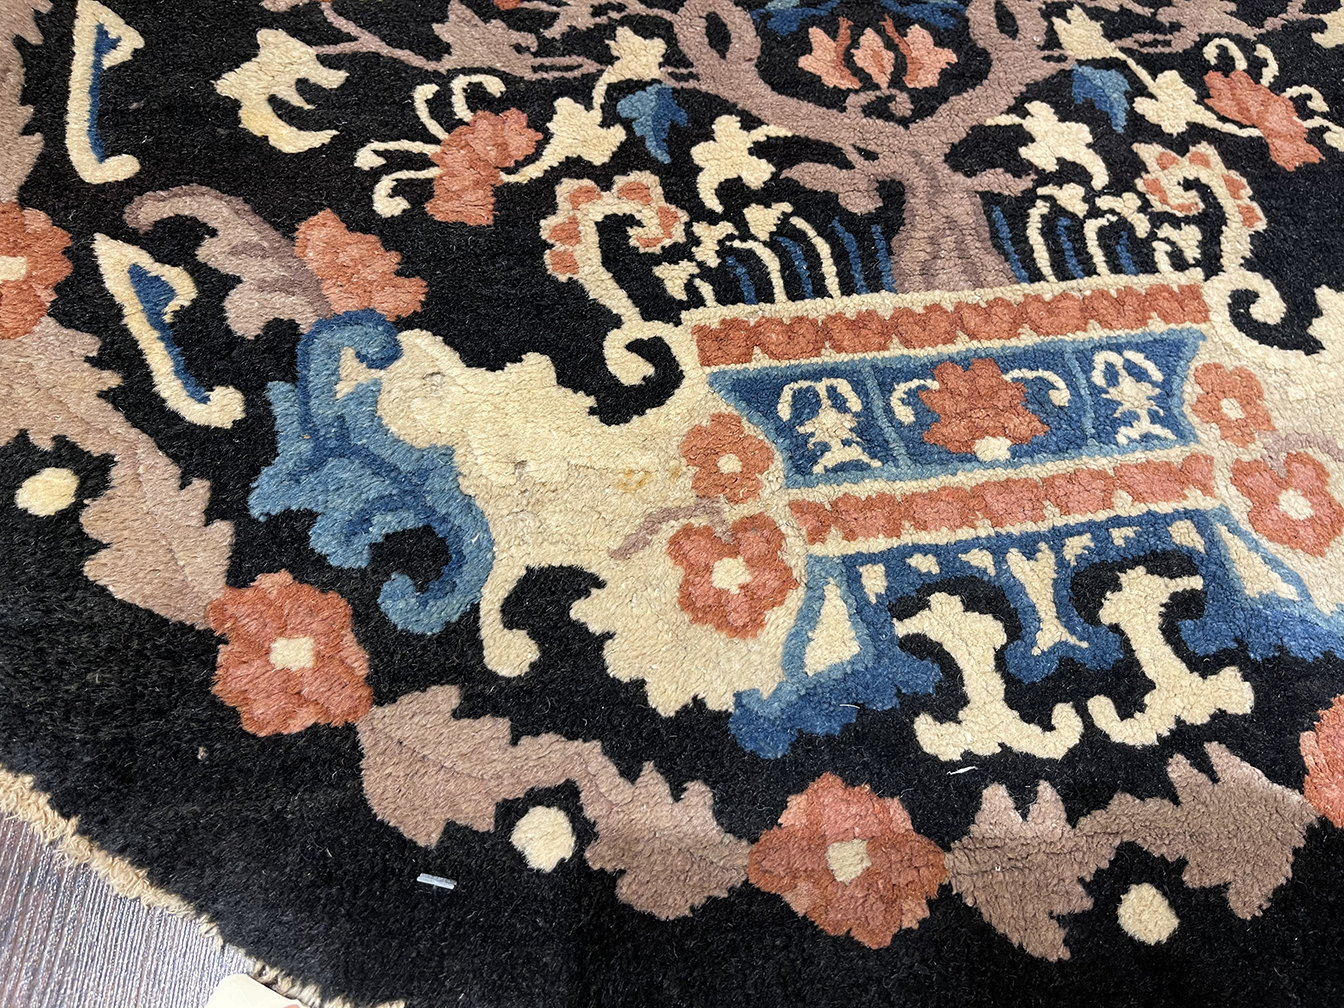 Antique chinese Rug - # 55920